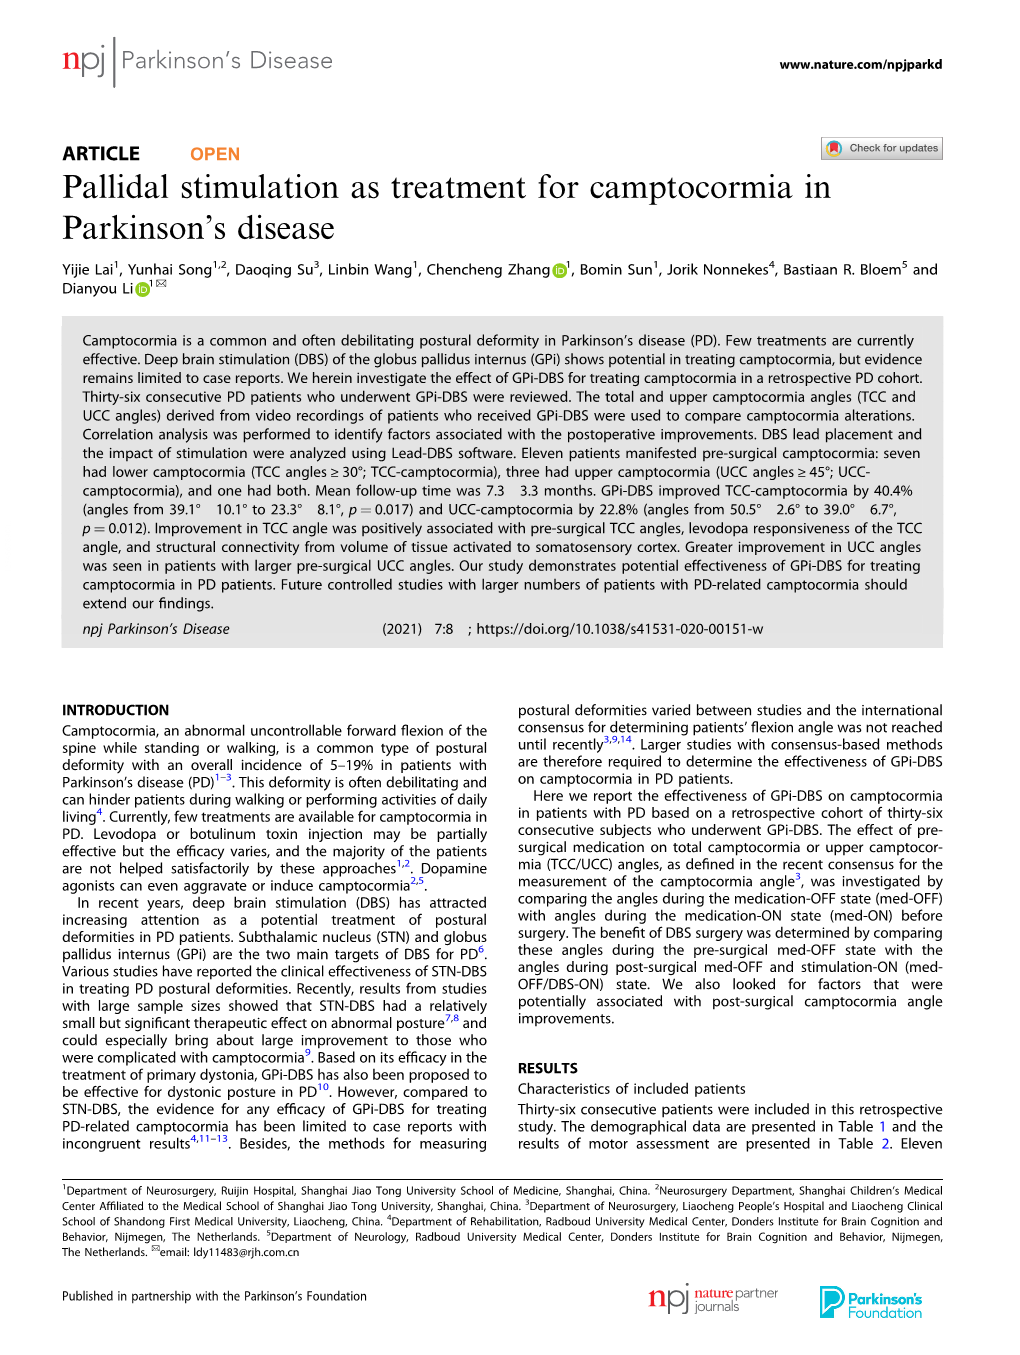 Pallidal Stimulation As Treatment for Camptocormia in Parkinson's Disease